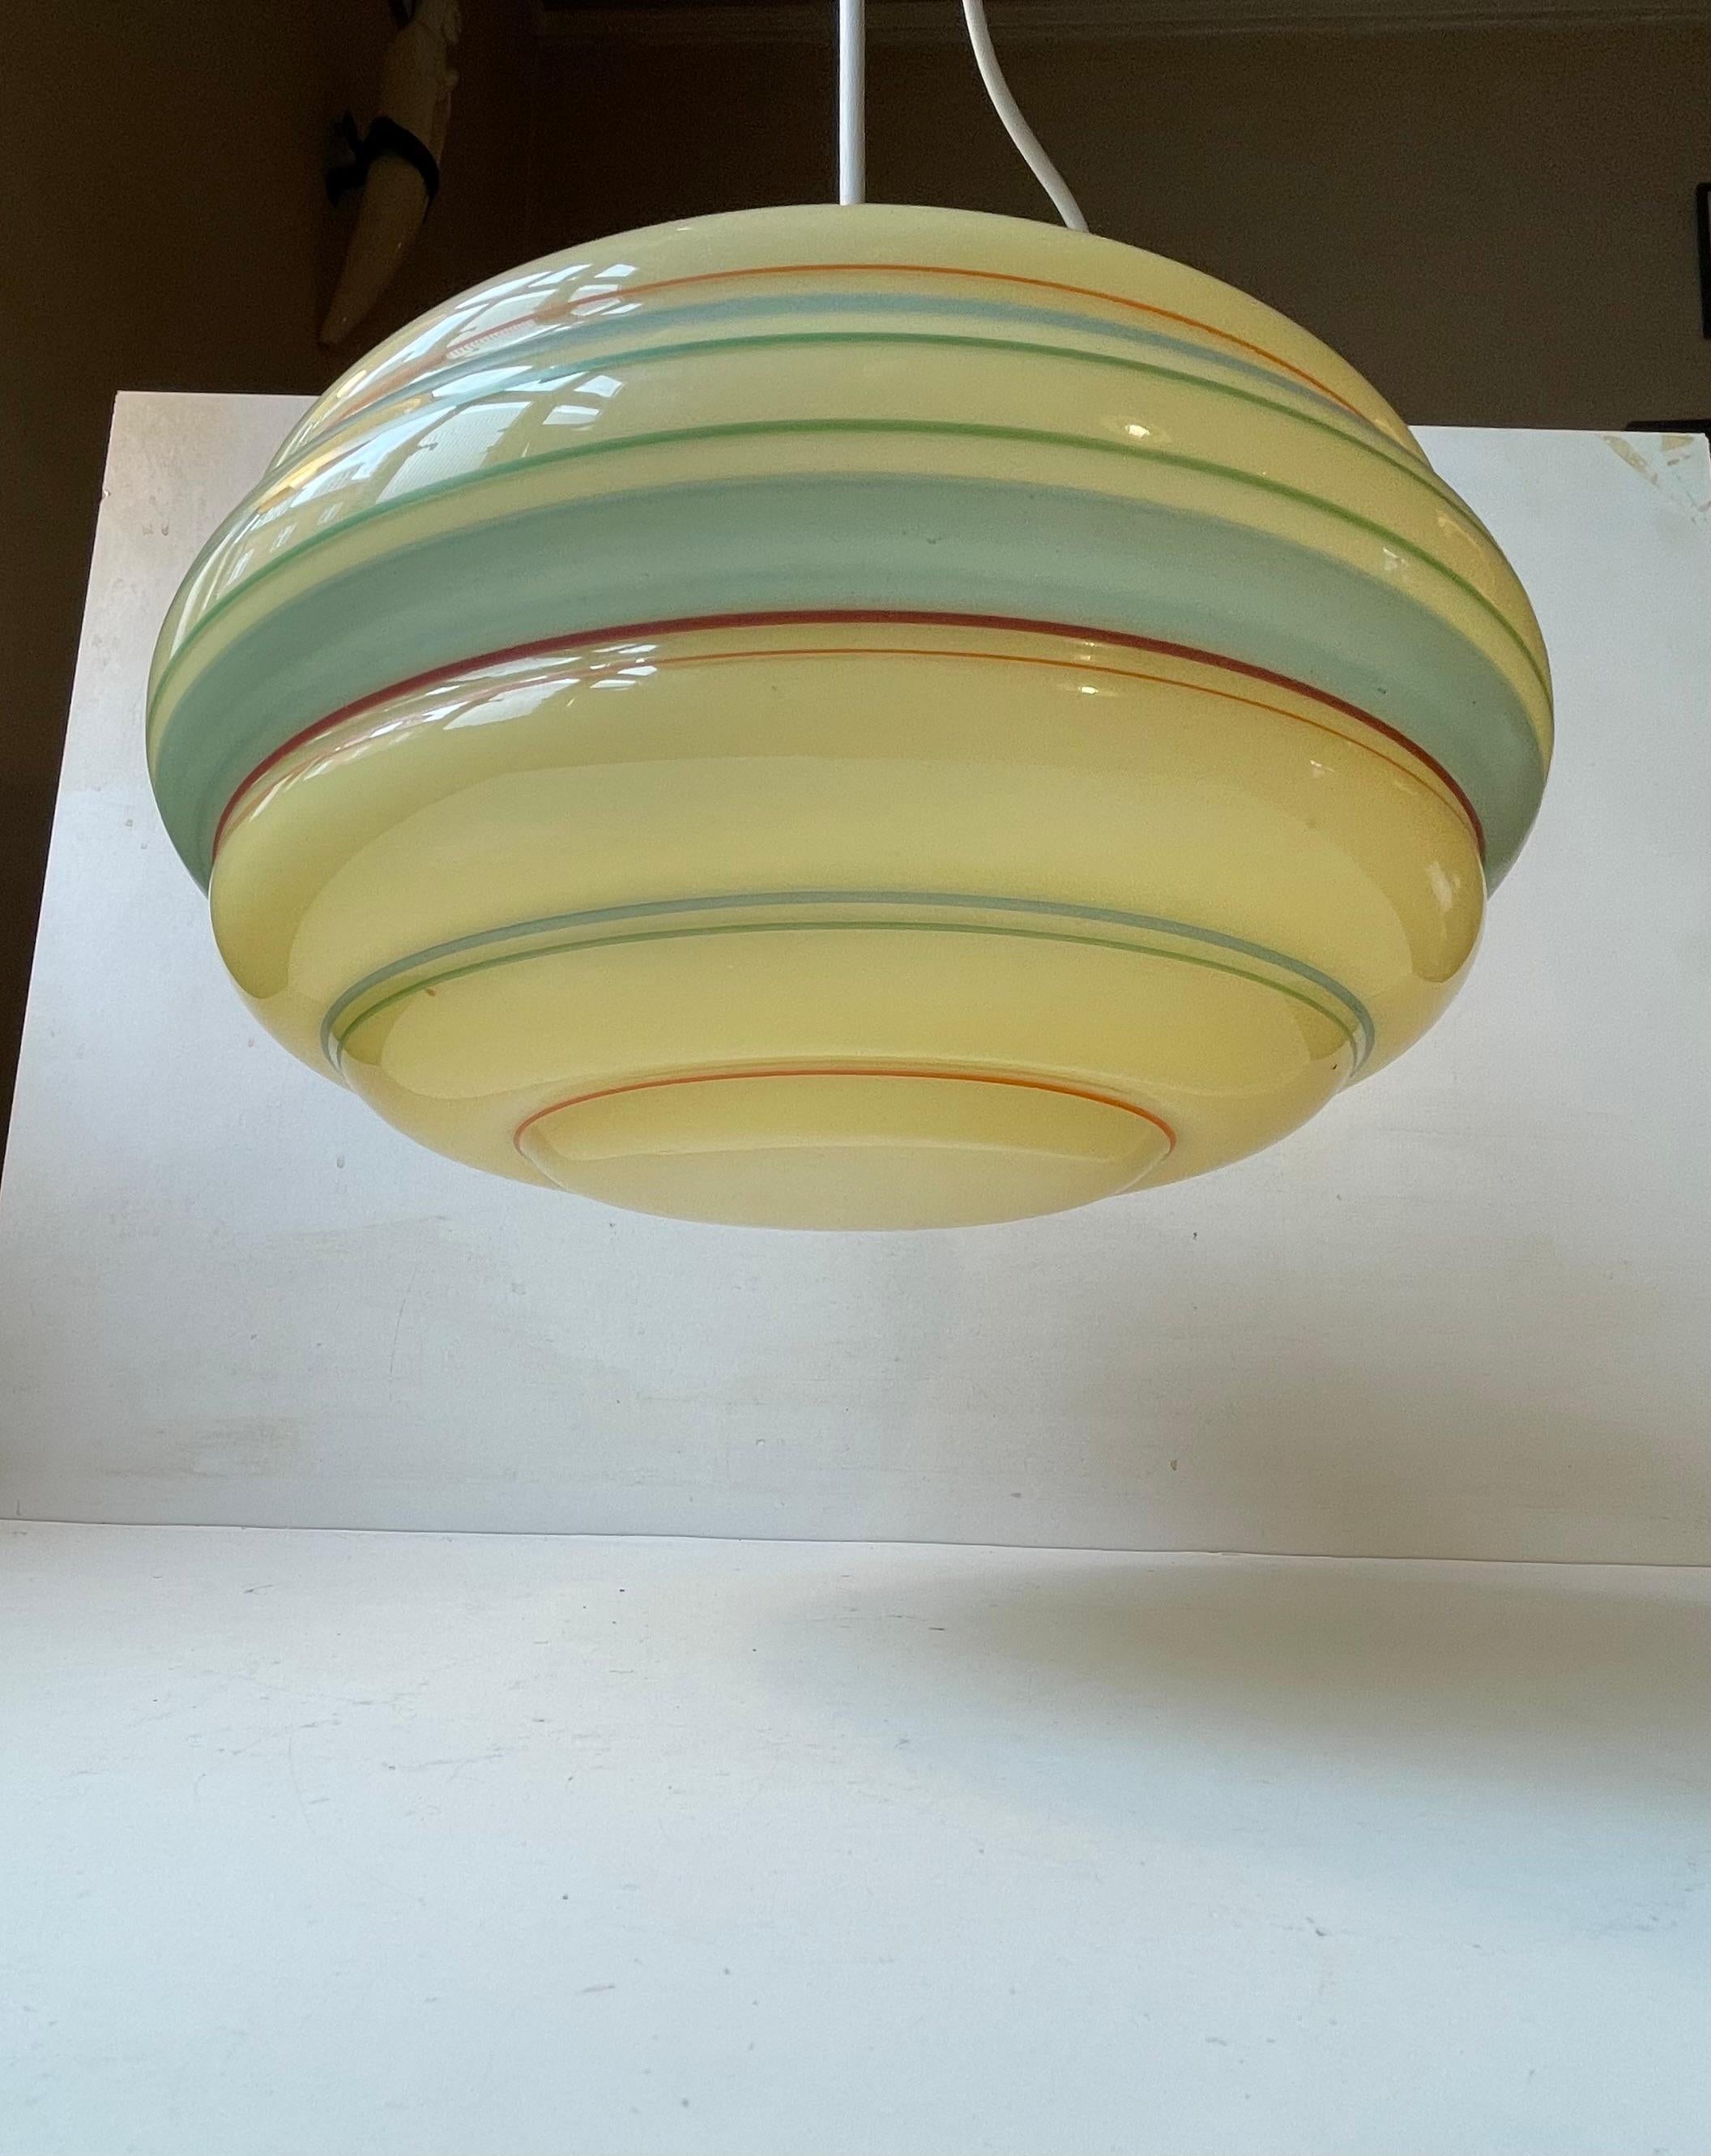 Danish Functionalist Pendant Lamp in Striped Opaline Glass, 1930s In Good Condition For Sale In Esbjerg, DK